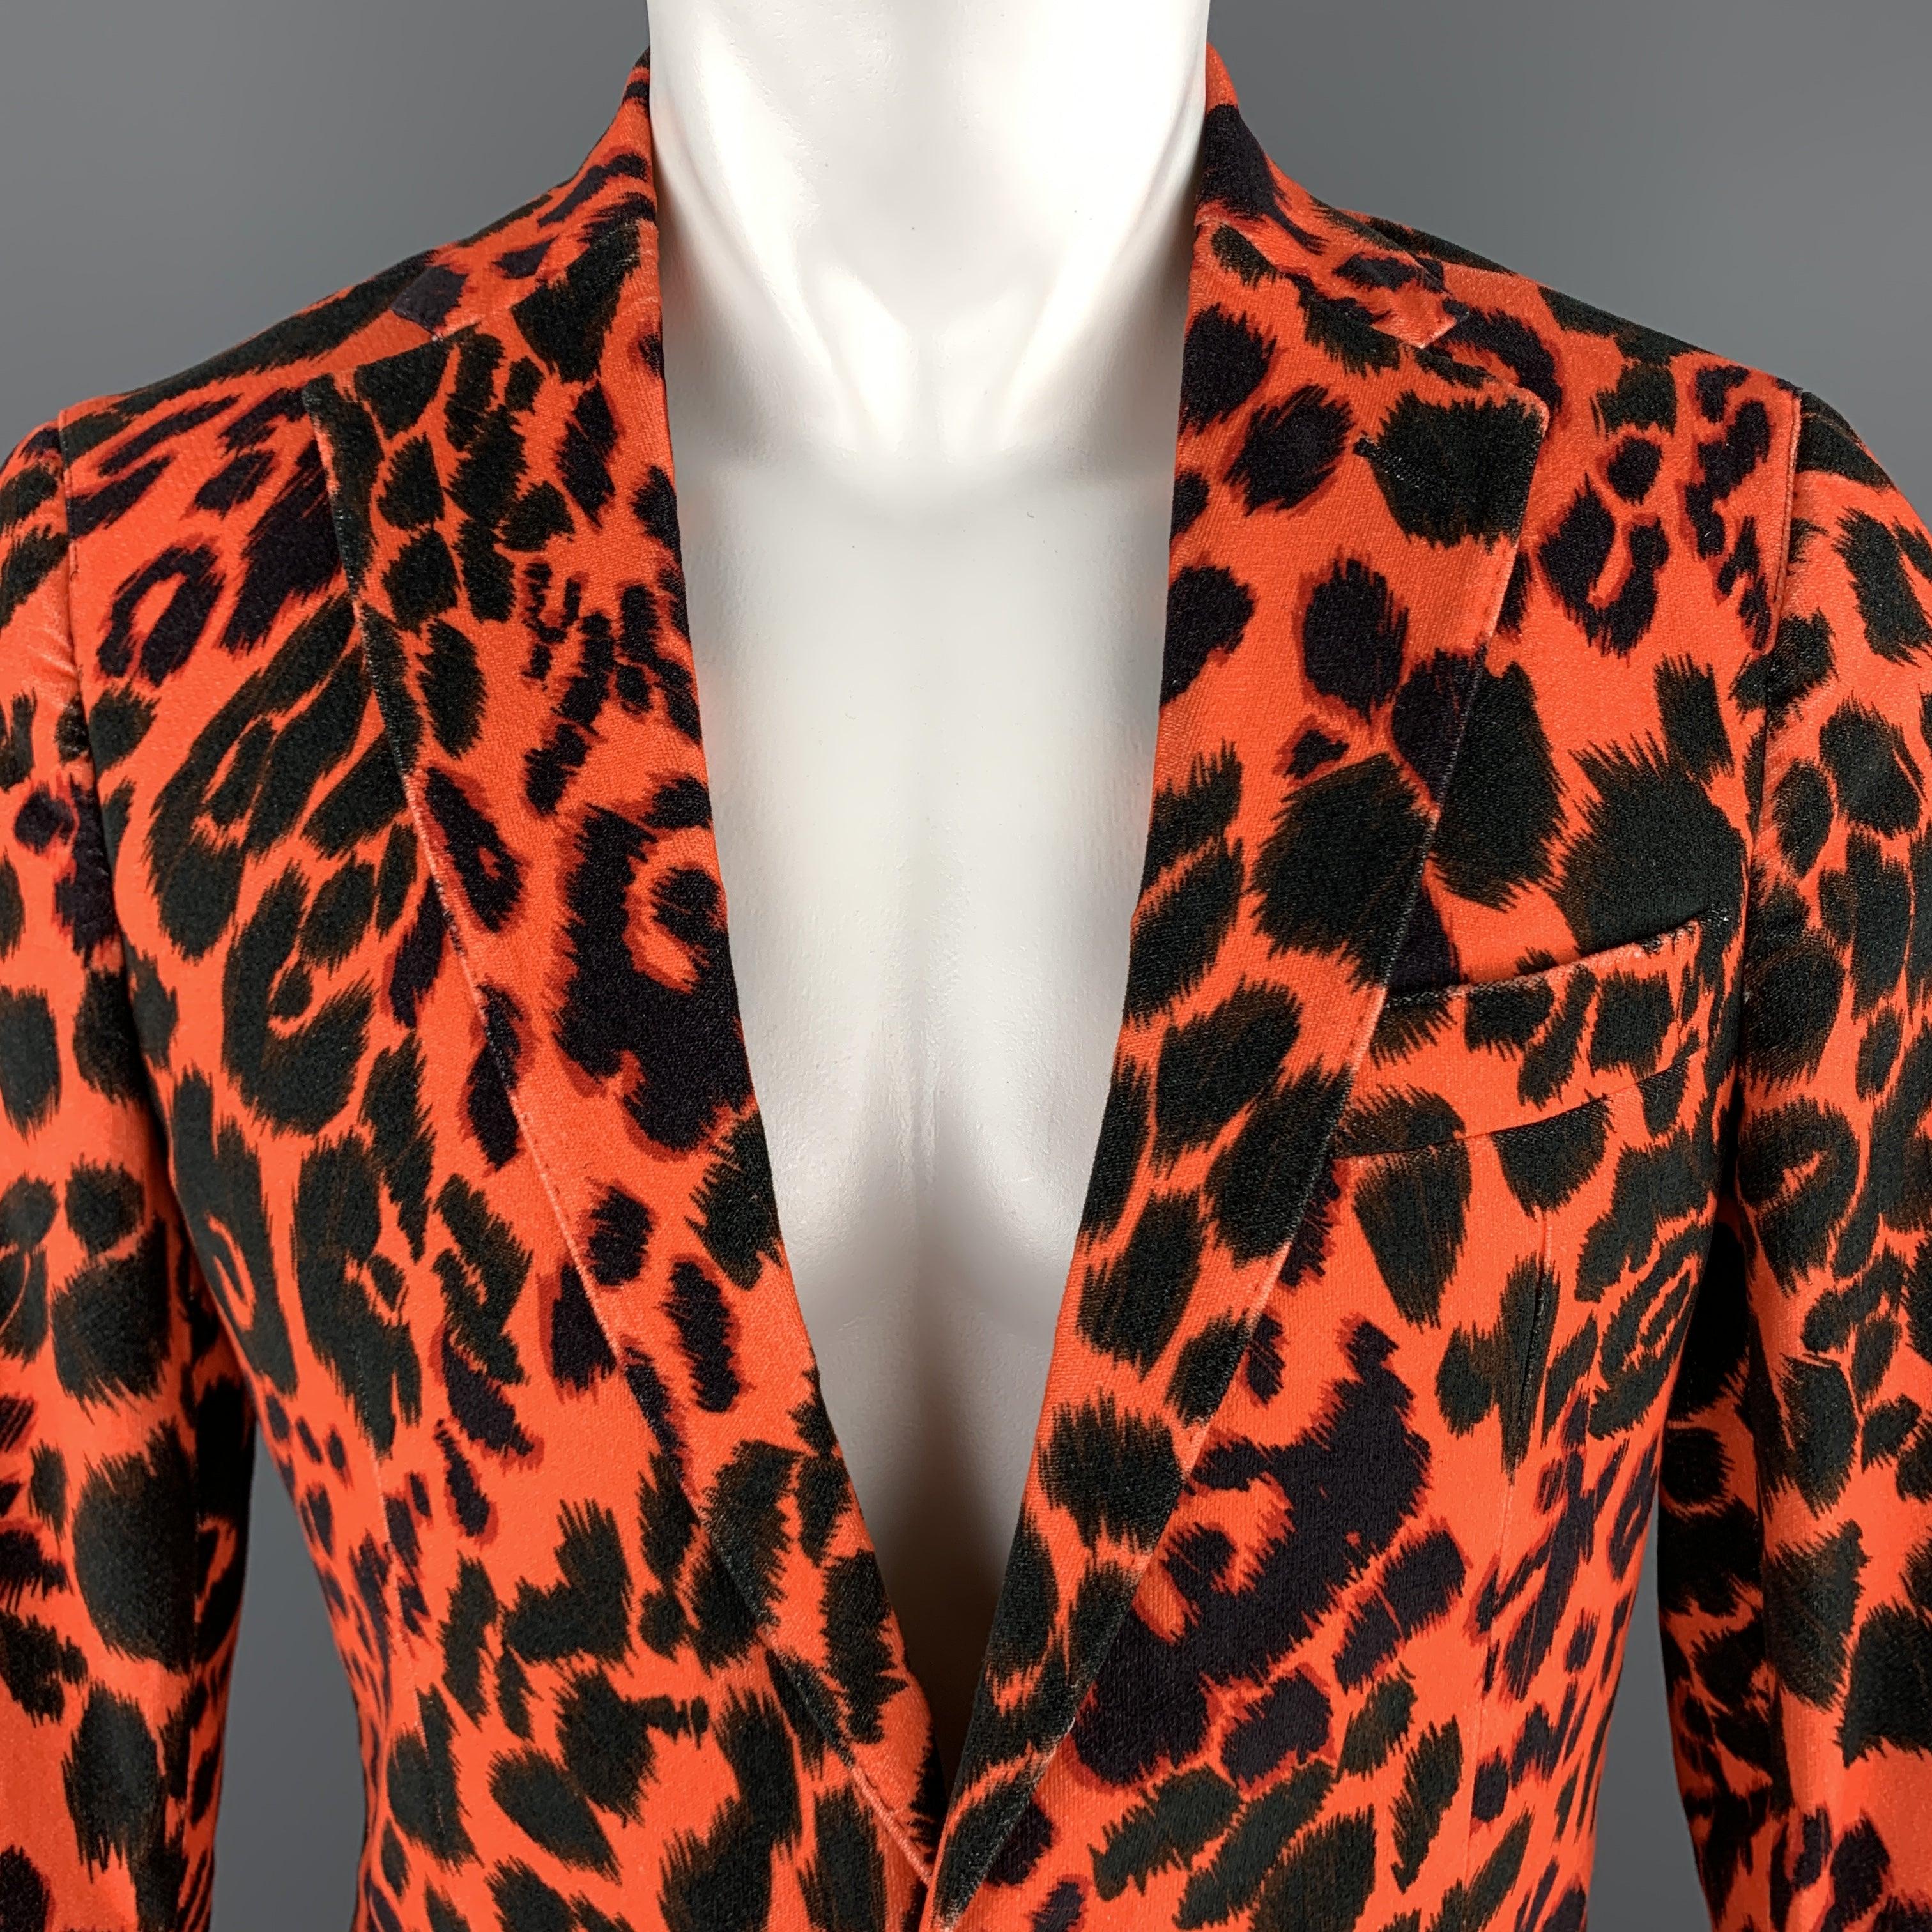 R13
sport coat comes in vibrant orange and black retro leopard printed cotton velvet with a notch lapel, single breasted, two button front, and functional button front. Made in USA.Excellent Pre-Owned Condition.
 

Marked:   US 38 REG